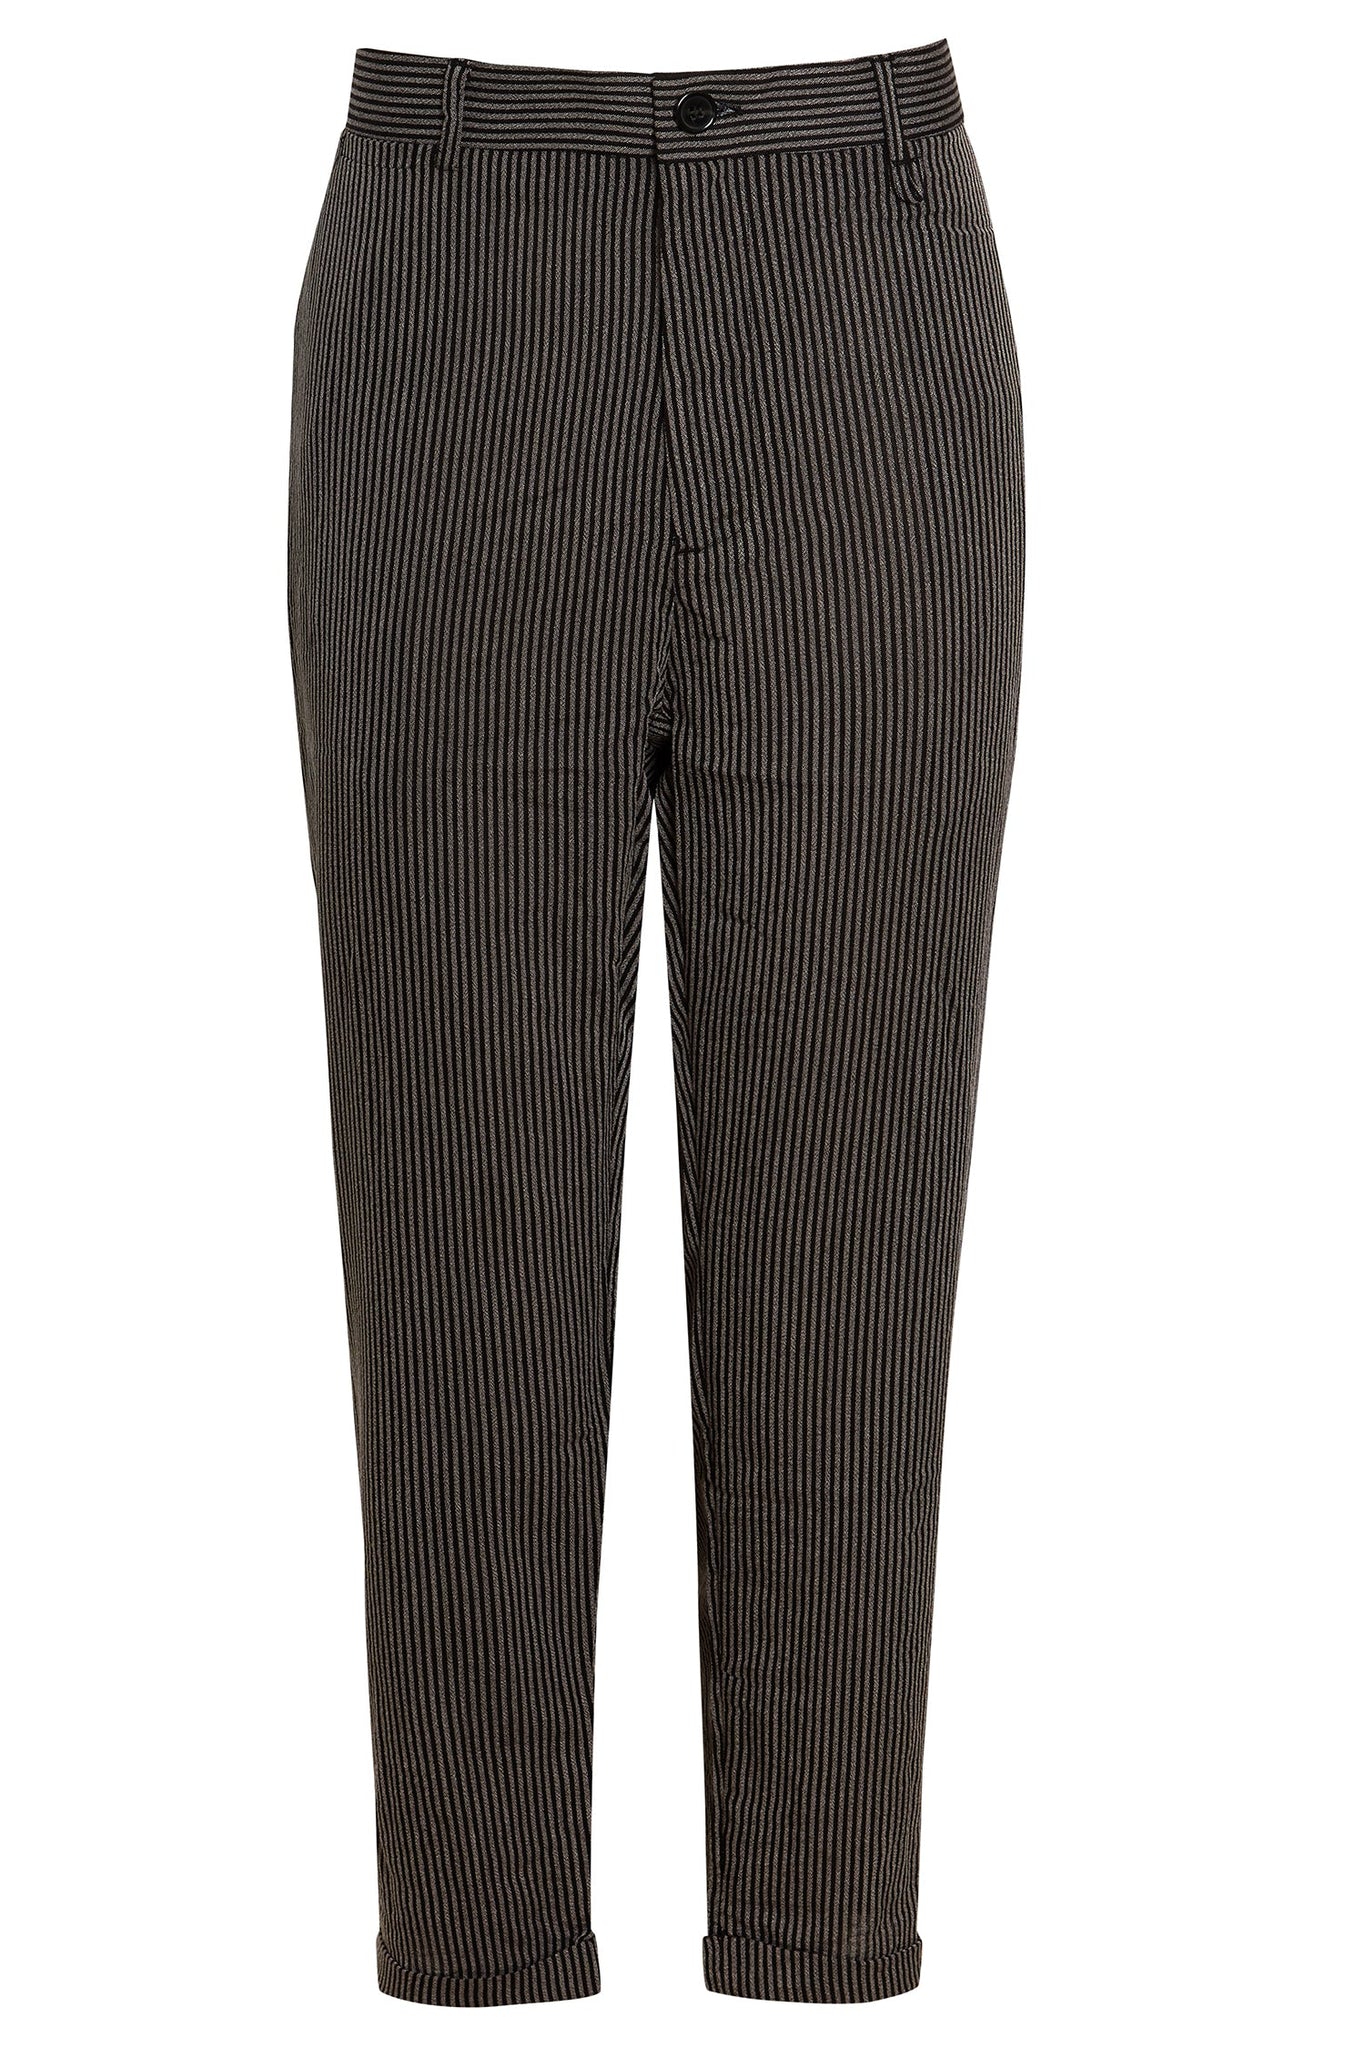 STRIPE TAILORED TURN-UP TROUSER